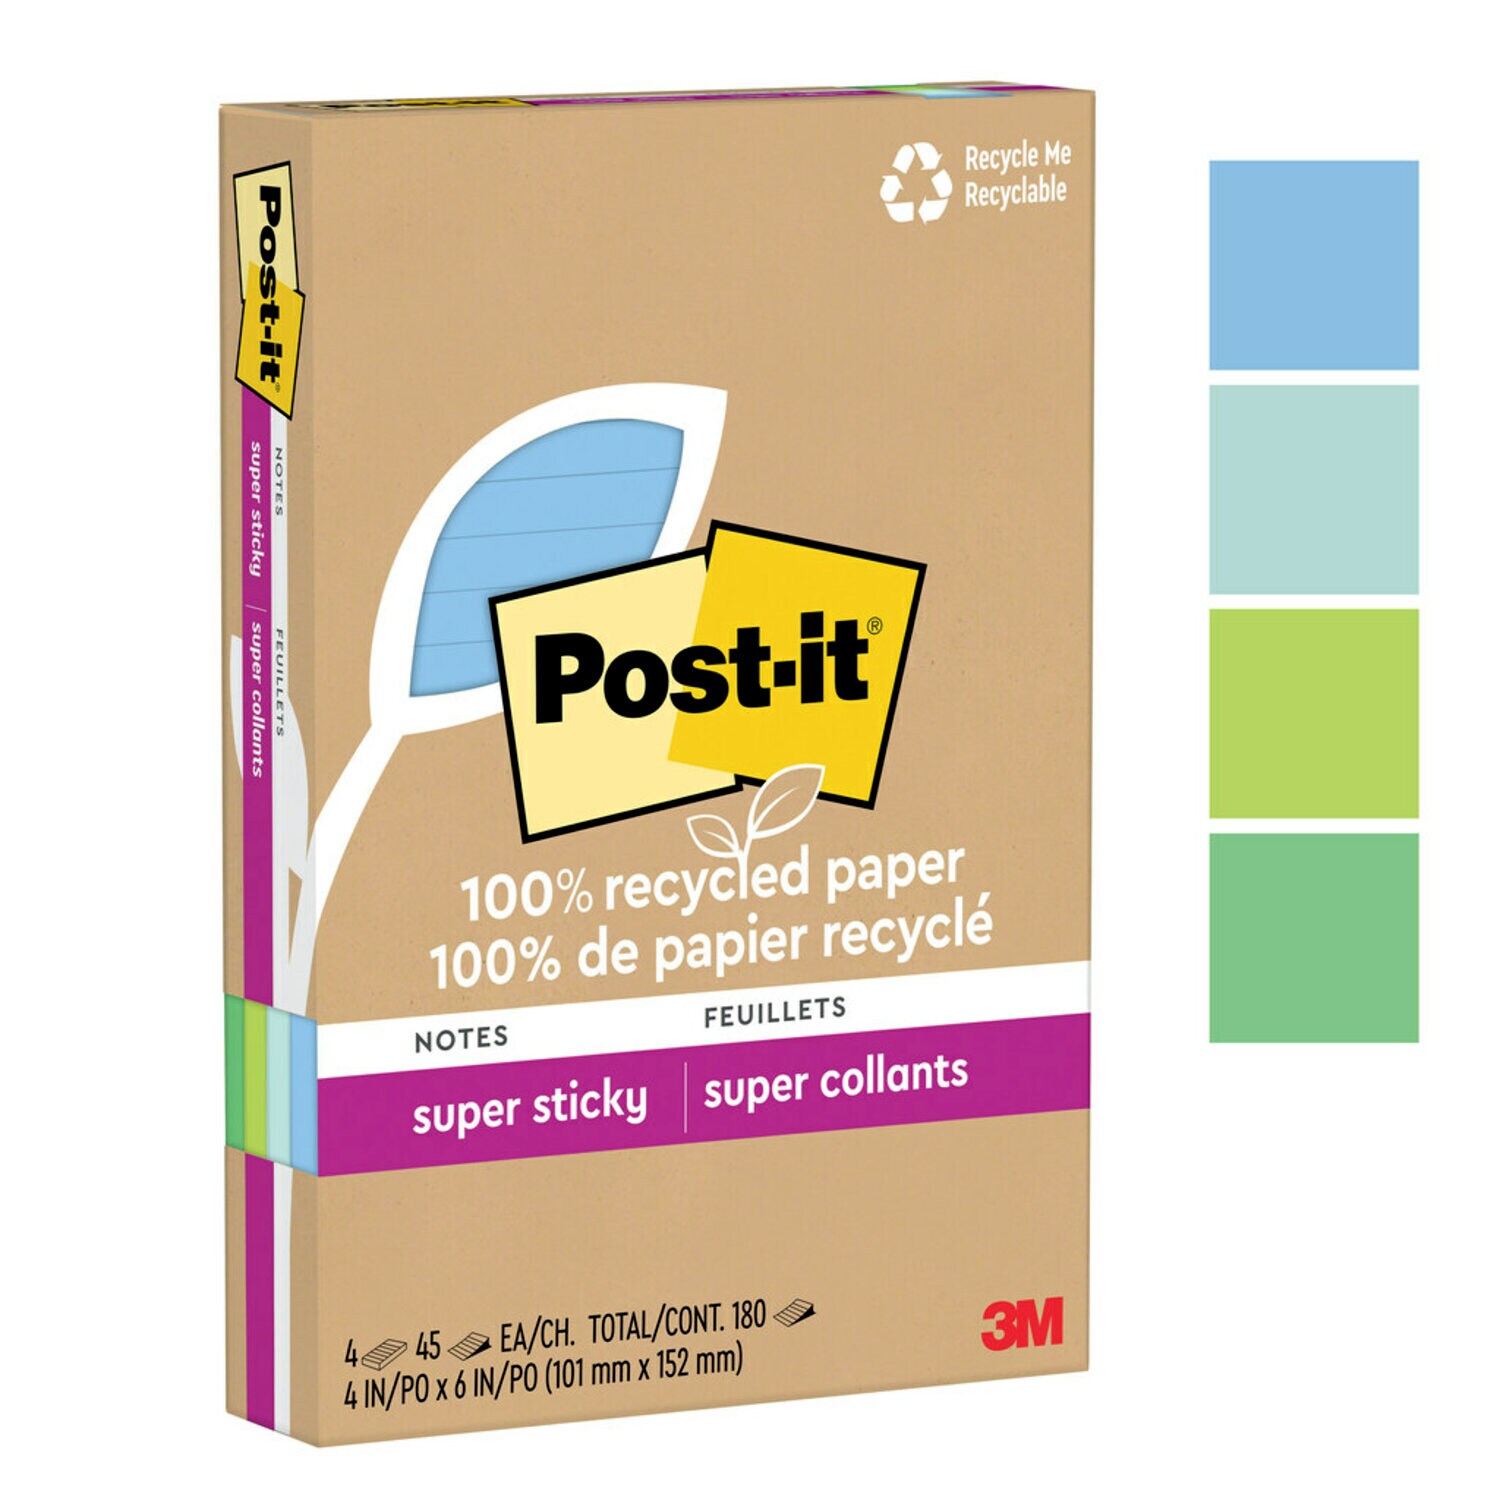 7100290304 - Post-it Super Sticky Recycled Notes 4621R-4SST, 4 in x 6 in (101 mm x 152 mm)